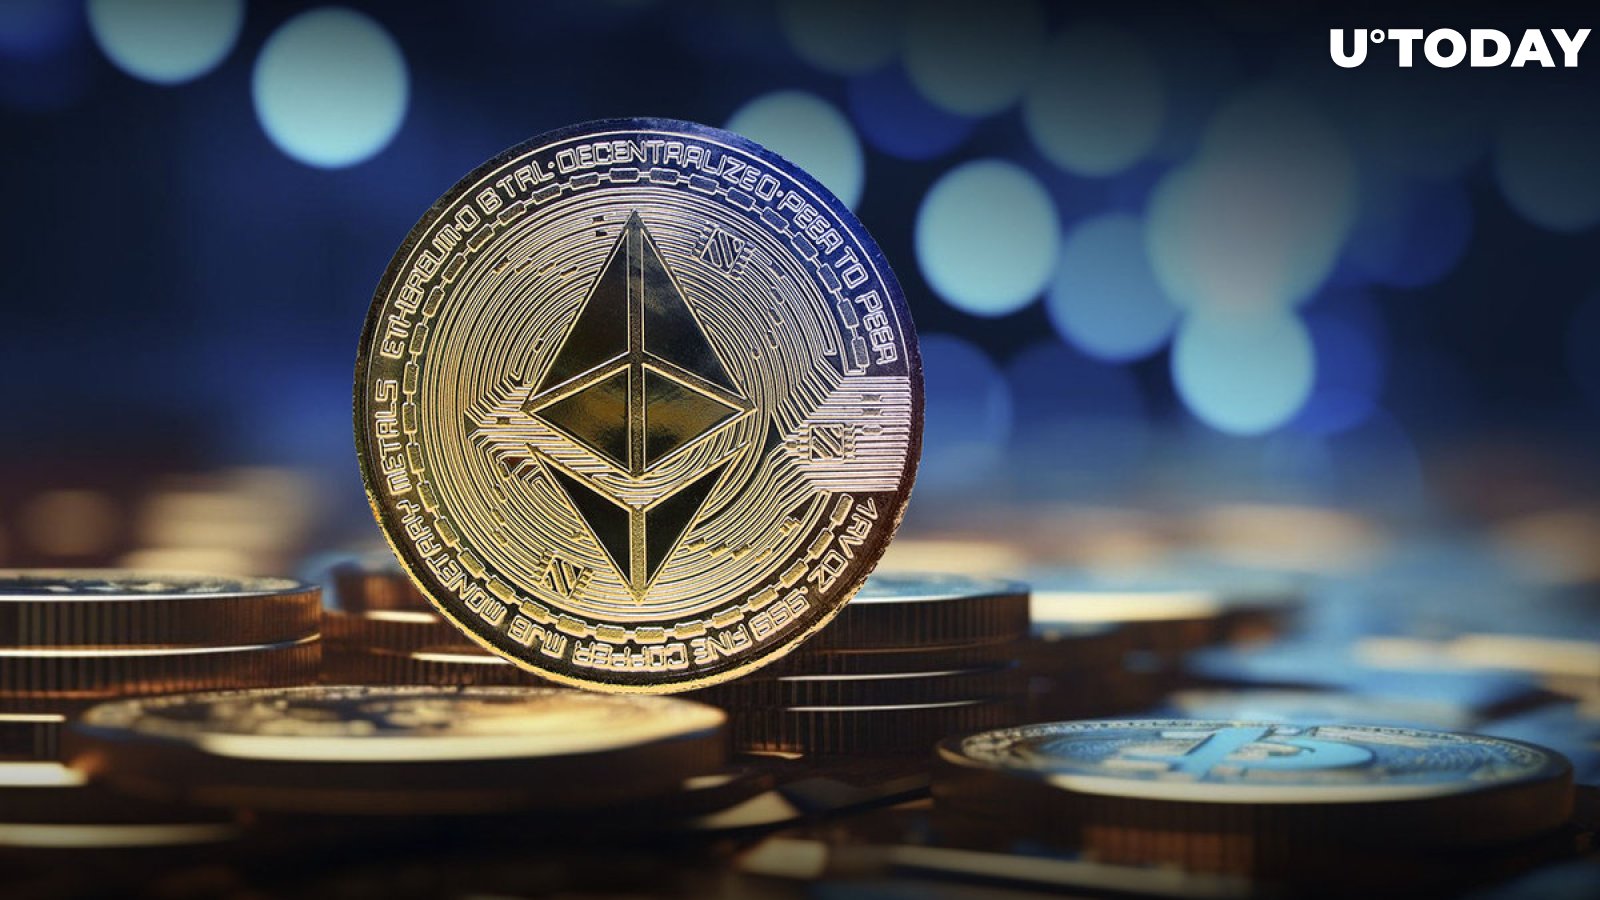 The 'Age of Ethereum' arrives for 5 key reasons